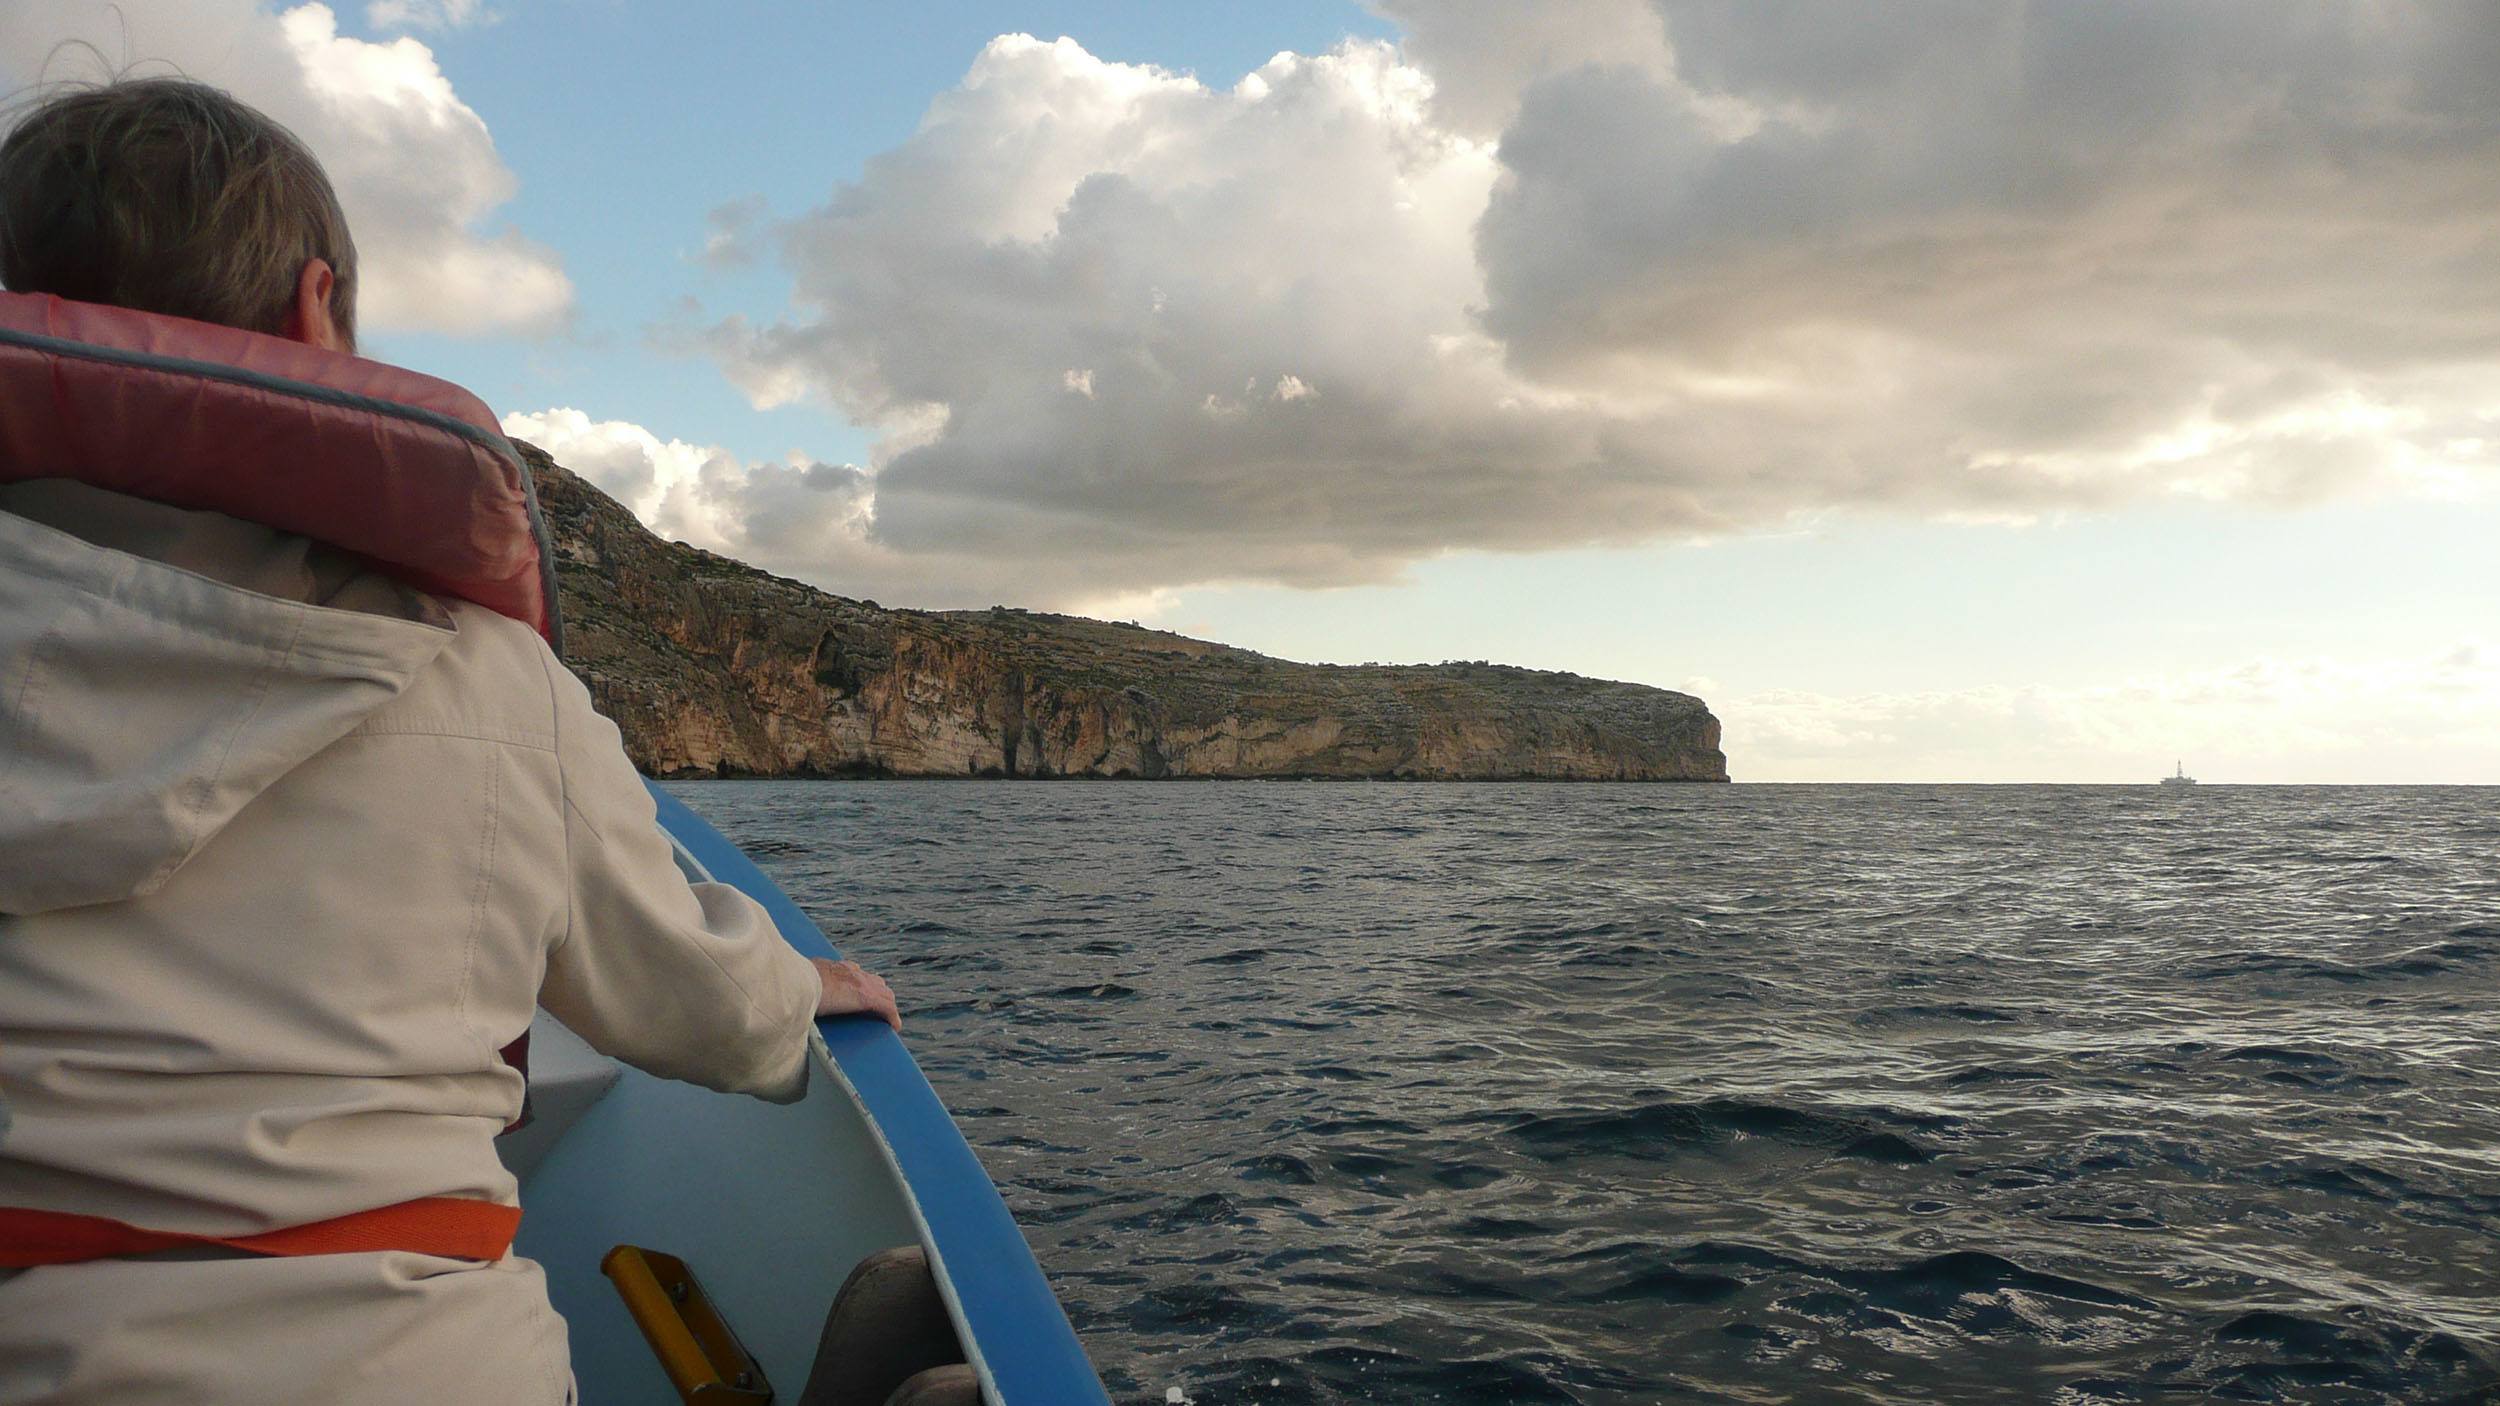 Man in boat en route to the Blue Grotto Malta